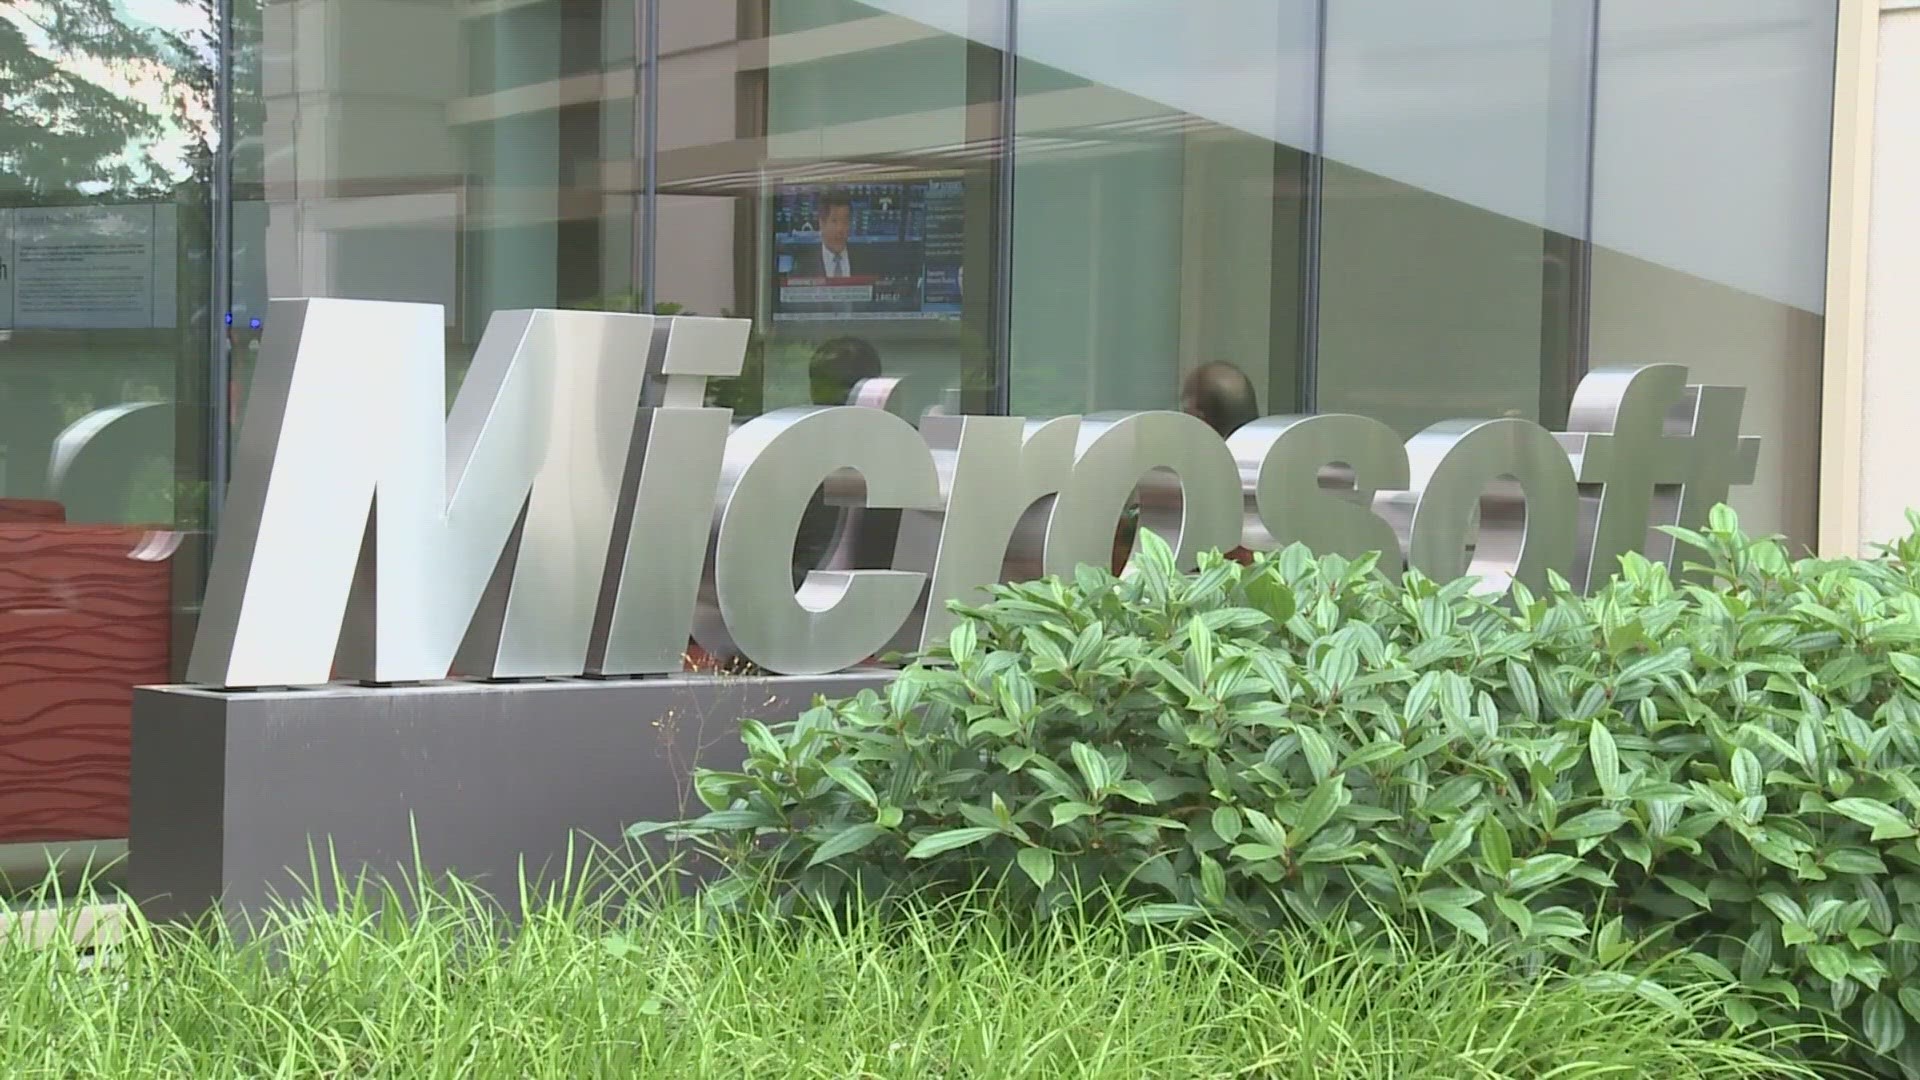 Microsoft, which is based in Redmond, Washington, said it followed IRS rules and will appeal the decision within the agency.